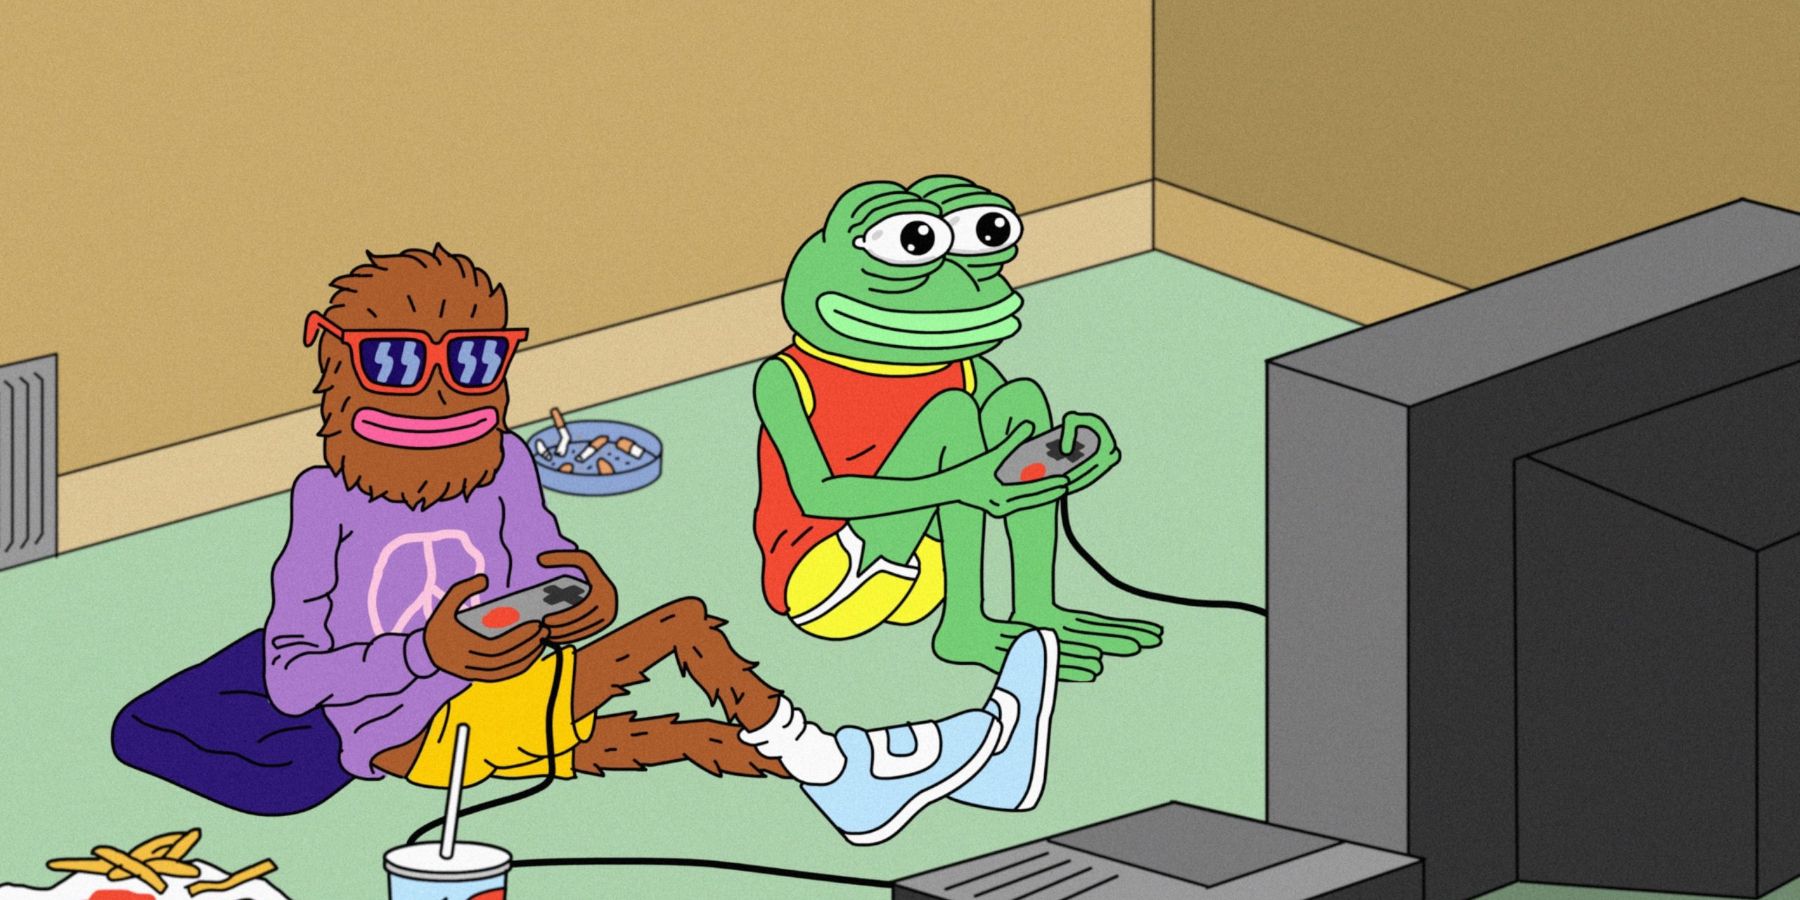 Pepe and Landwolf, two characters from the online comic Boys Club, sit on the floor and play video games together.